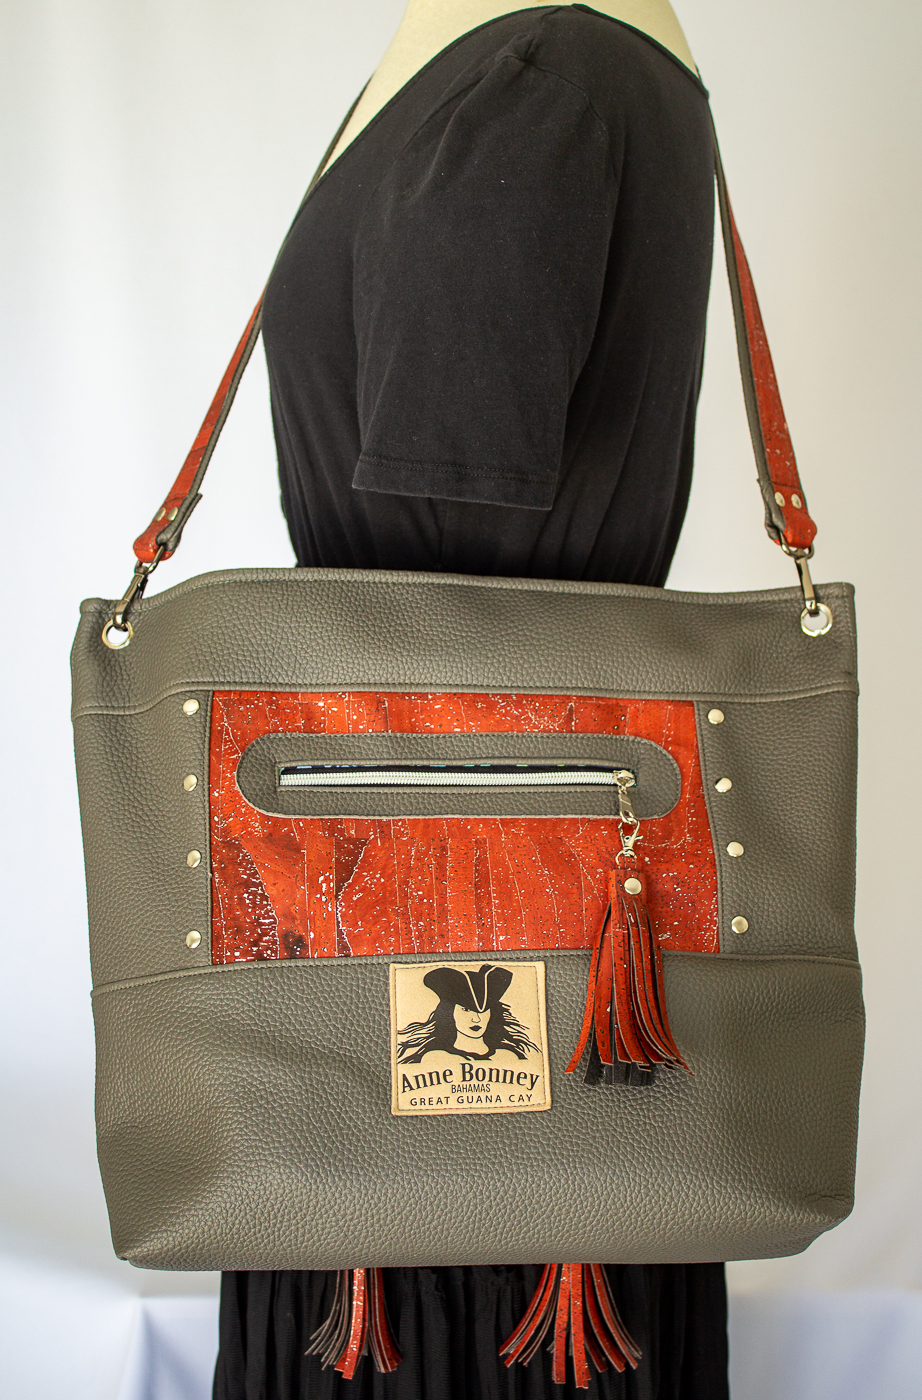 “Mary Read” Tote Bag With Zipper Closing – Anne Bonney Bags